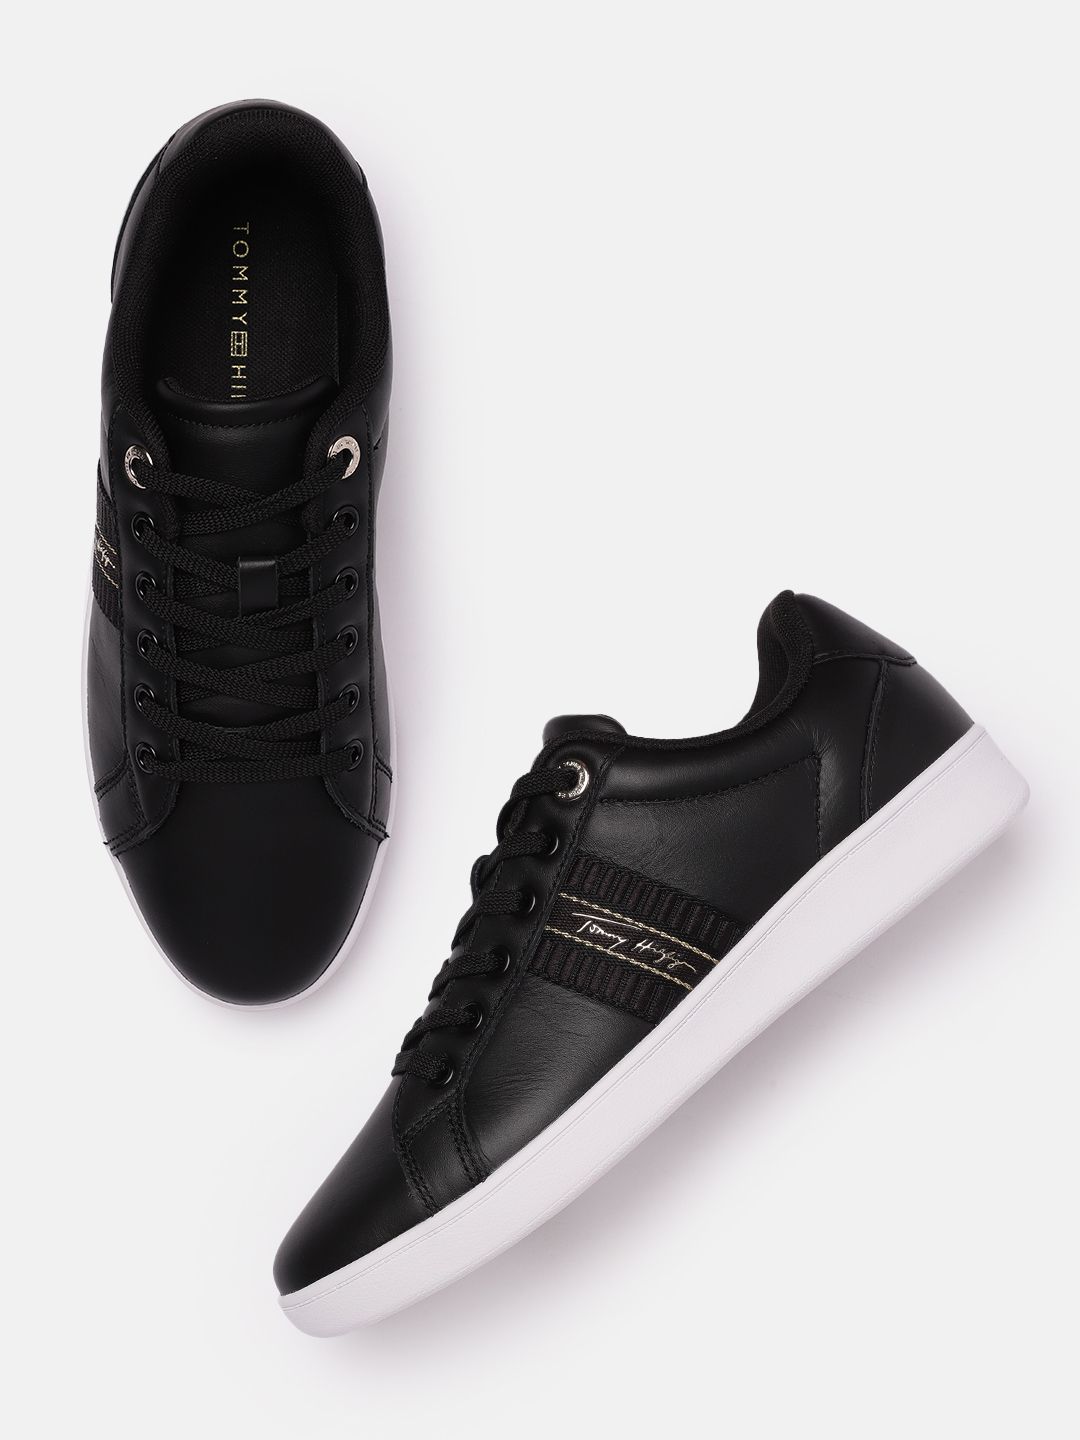 Tommy Hilfiger Women Black Solid Leather Regular Court Sneakers with Woven Design Detail Price in India